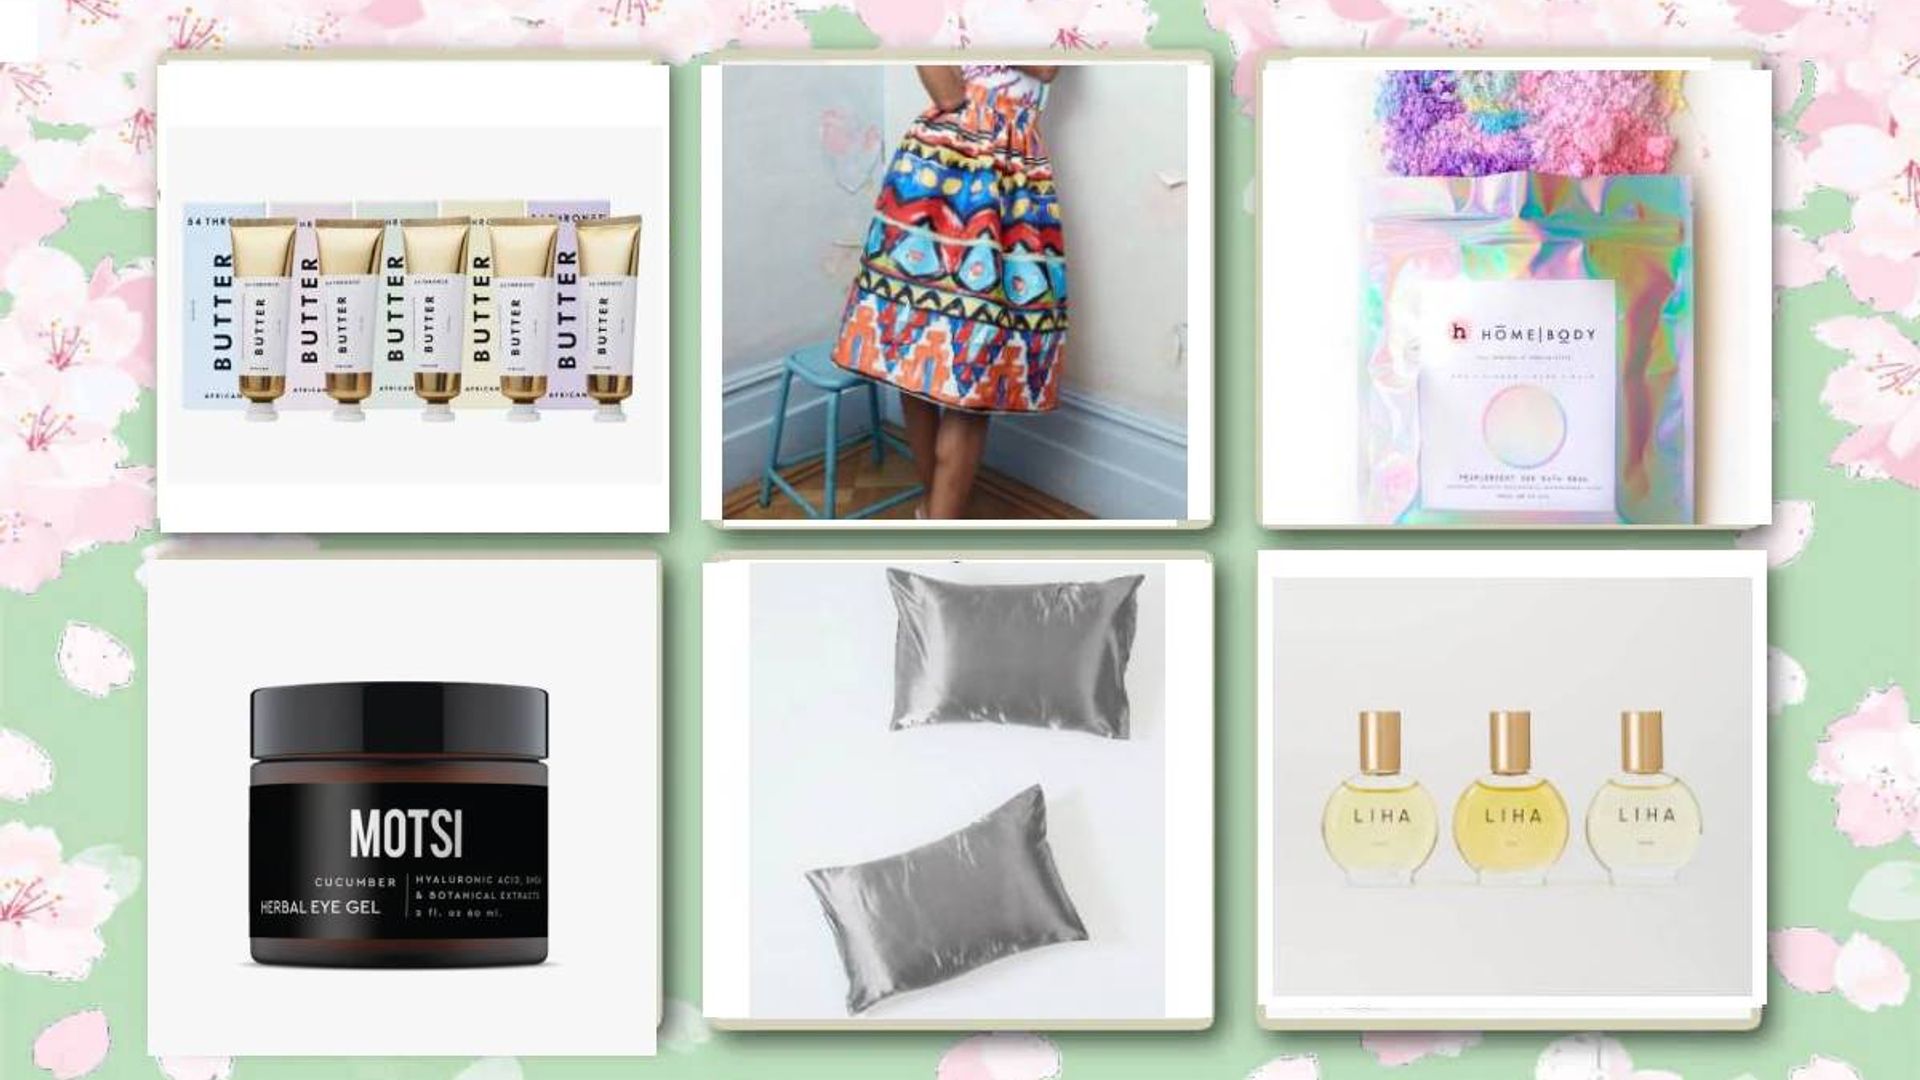 12 beauty and fashion Mother's Day gifts from black-owned businesses your mom will swoon over